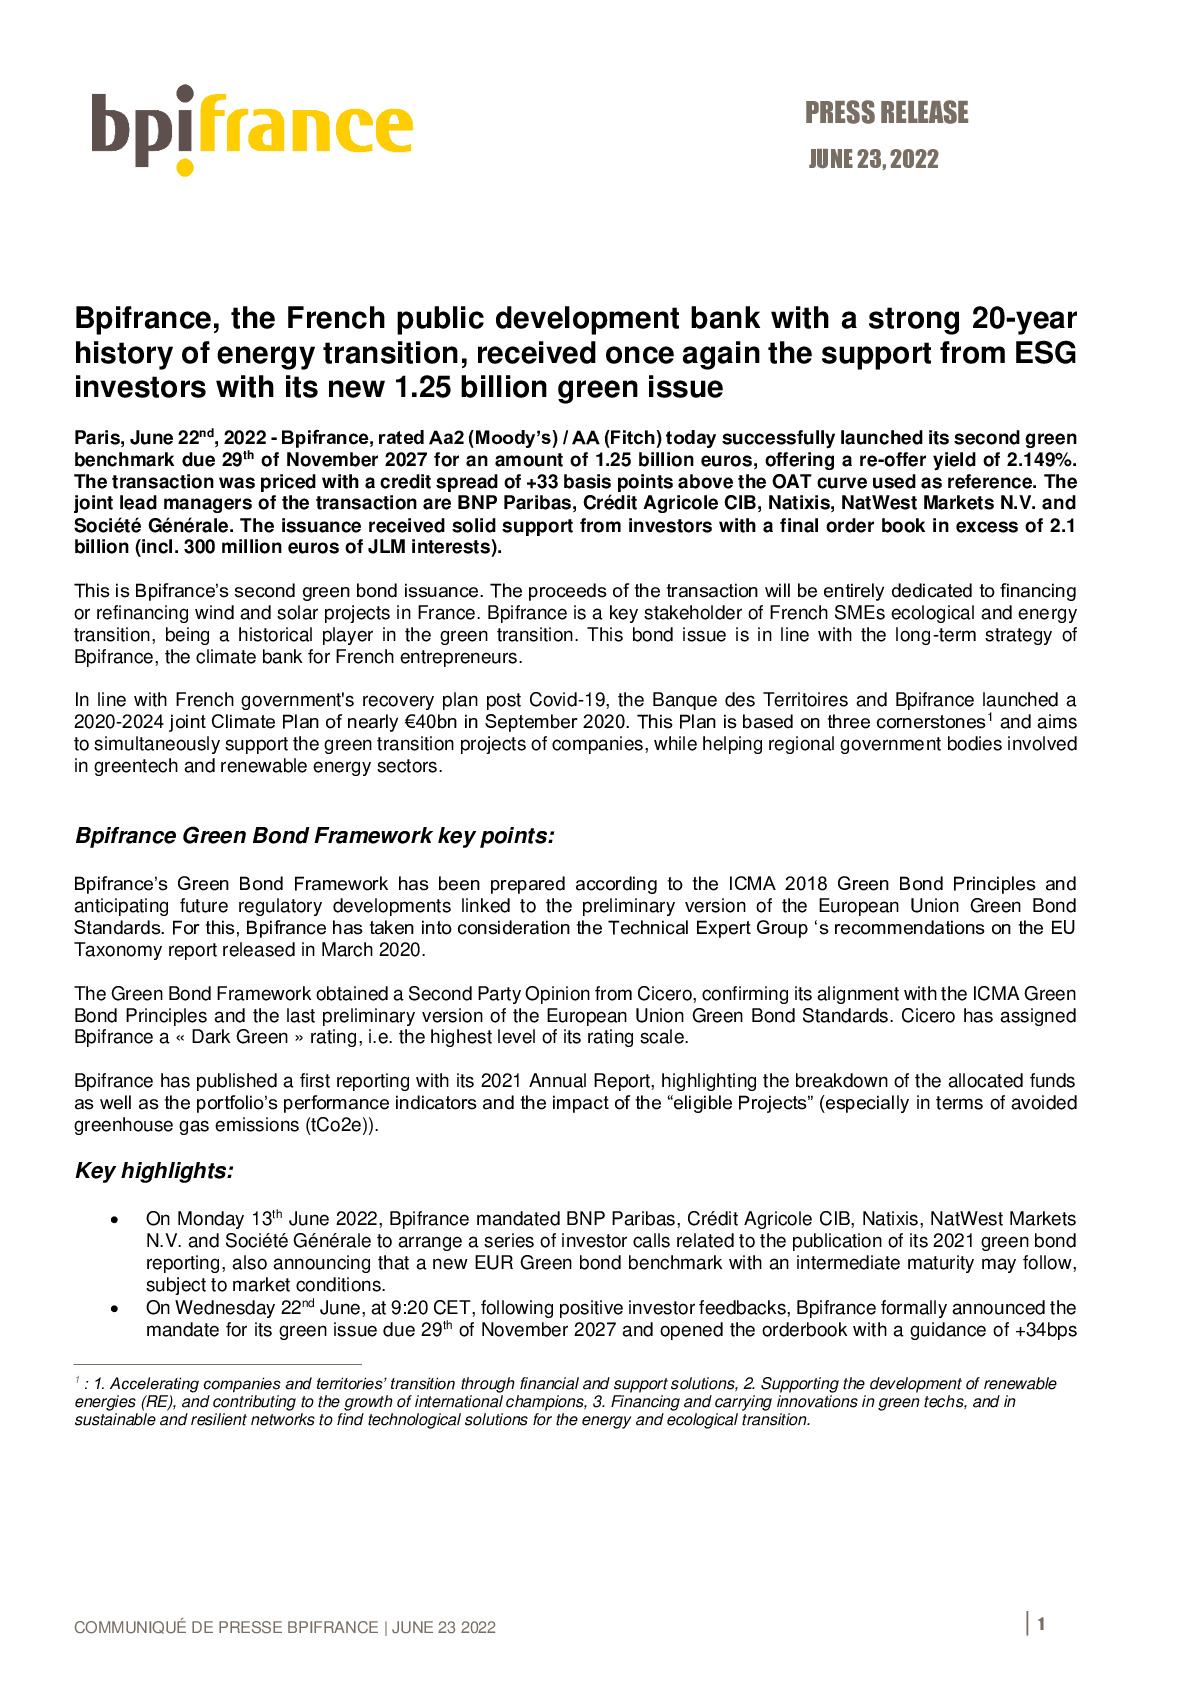 2022 06 23- PR Bpifrance the French public development bank received once again the support from ESG investors with its new 1-25 billion green issue-pdf